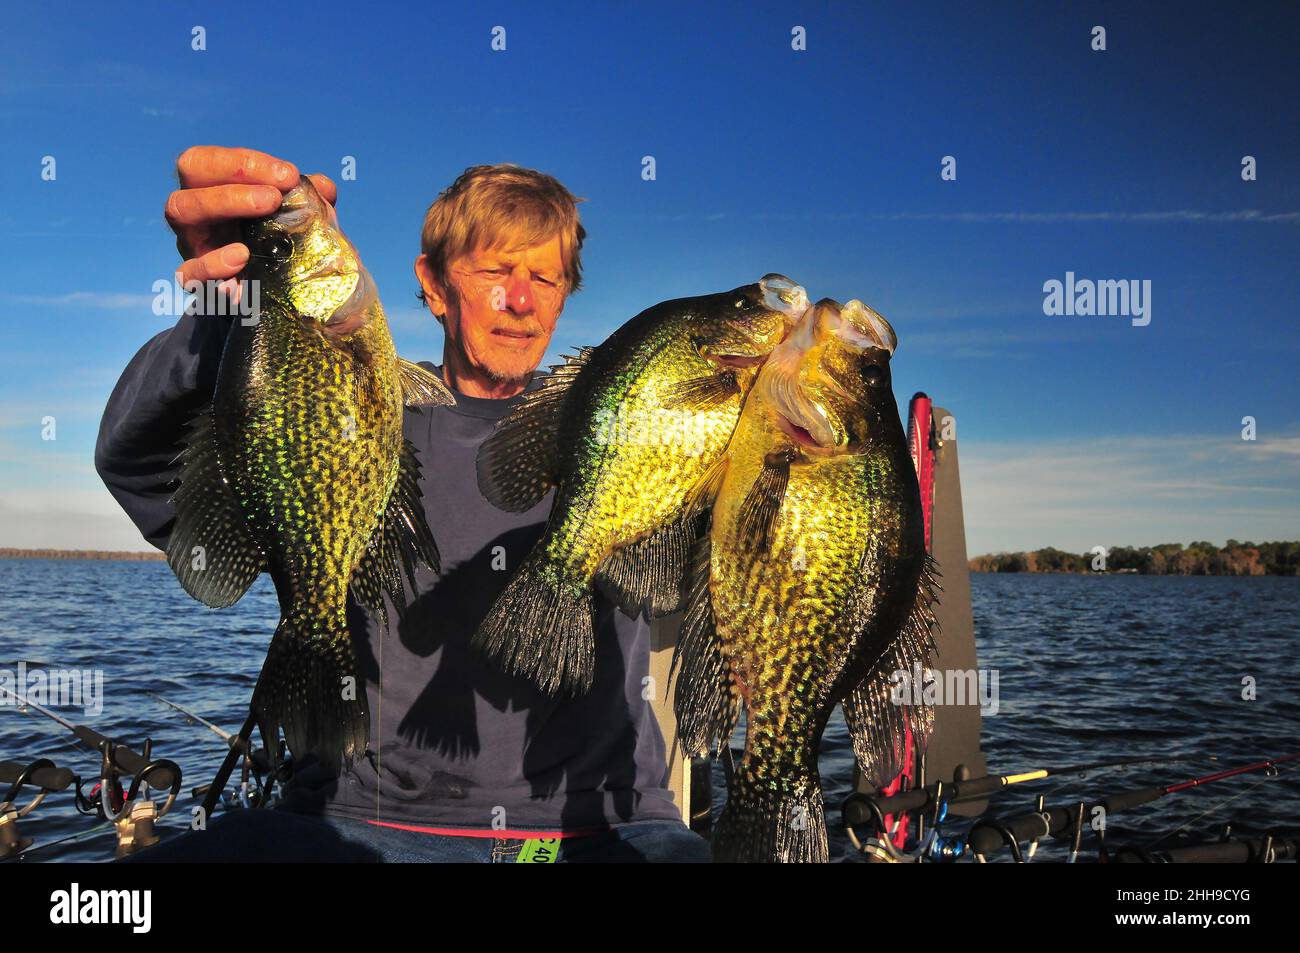 Guide Jack Smith lands three big 2-pound crappie (speckled perch) from Central Florida waters. Stock Photo